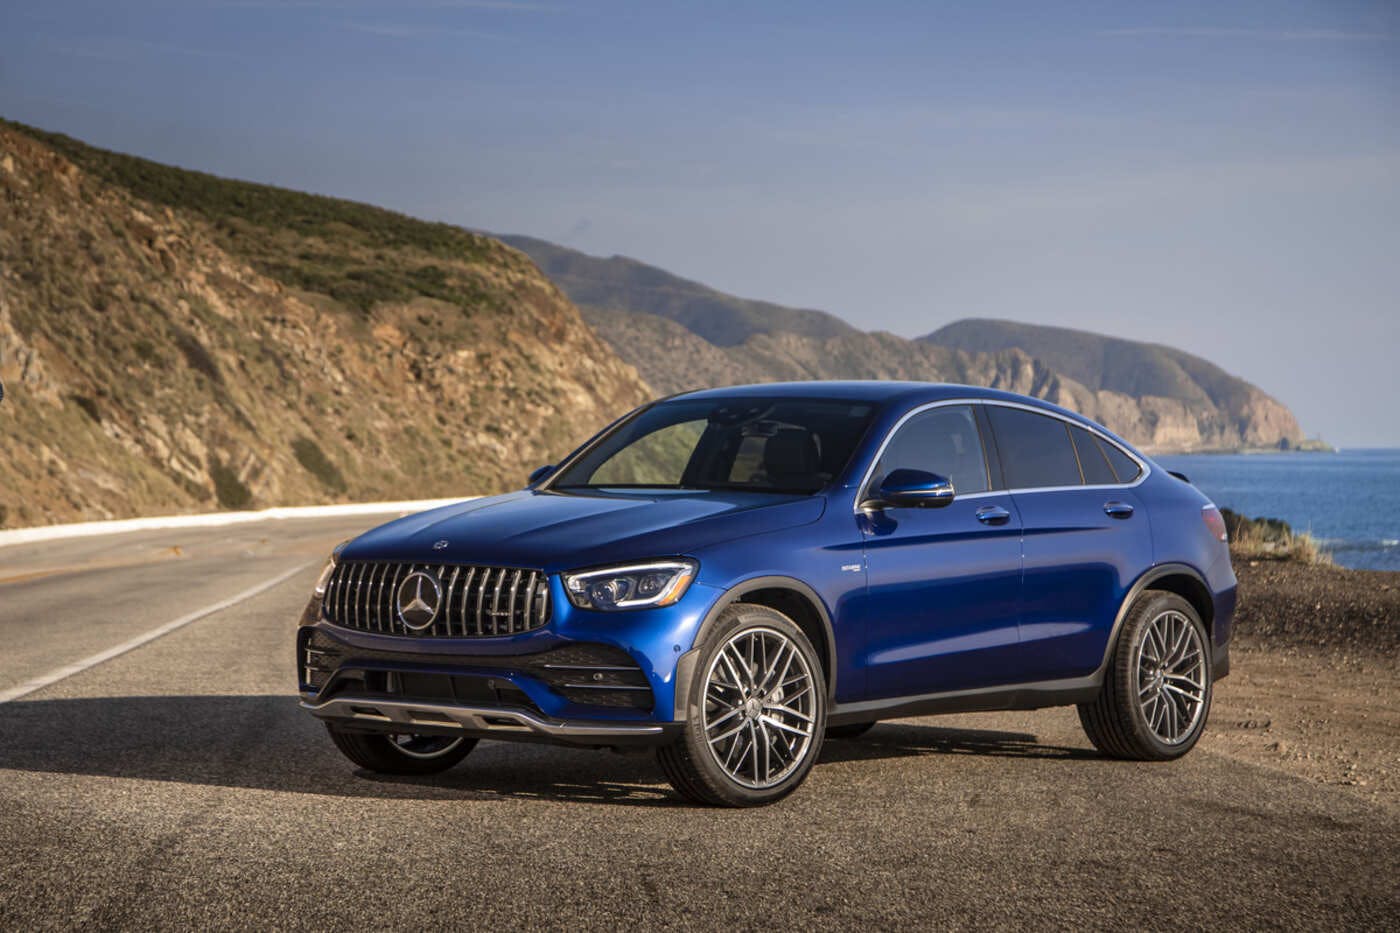 2023 Mercedes-Benz GLC 300 4Matic Hybrid Review: Fuel-Sipping Luxury